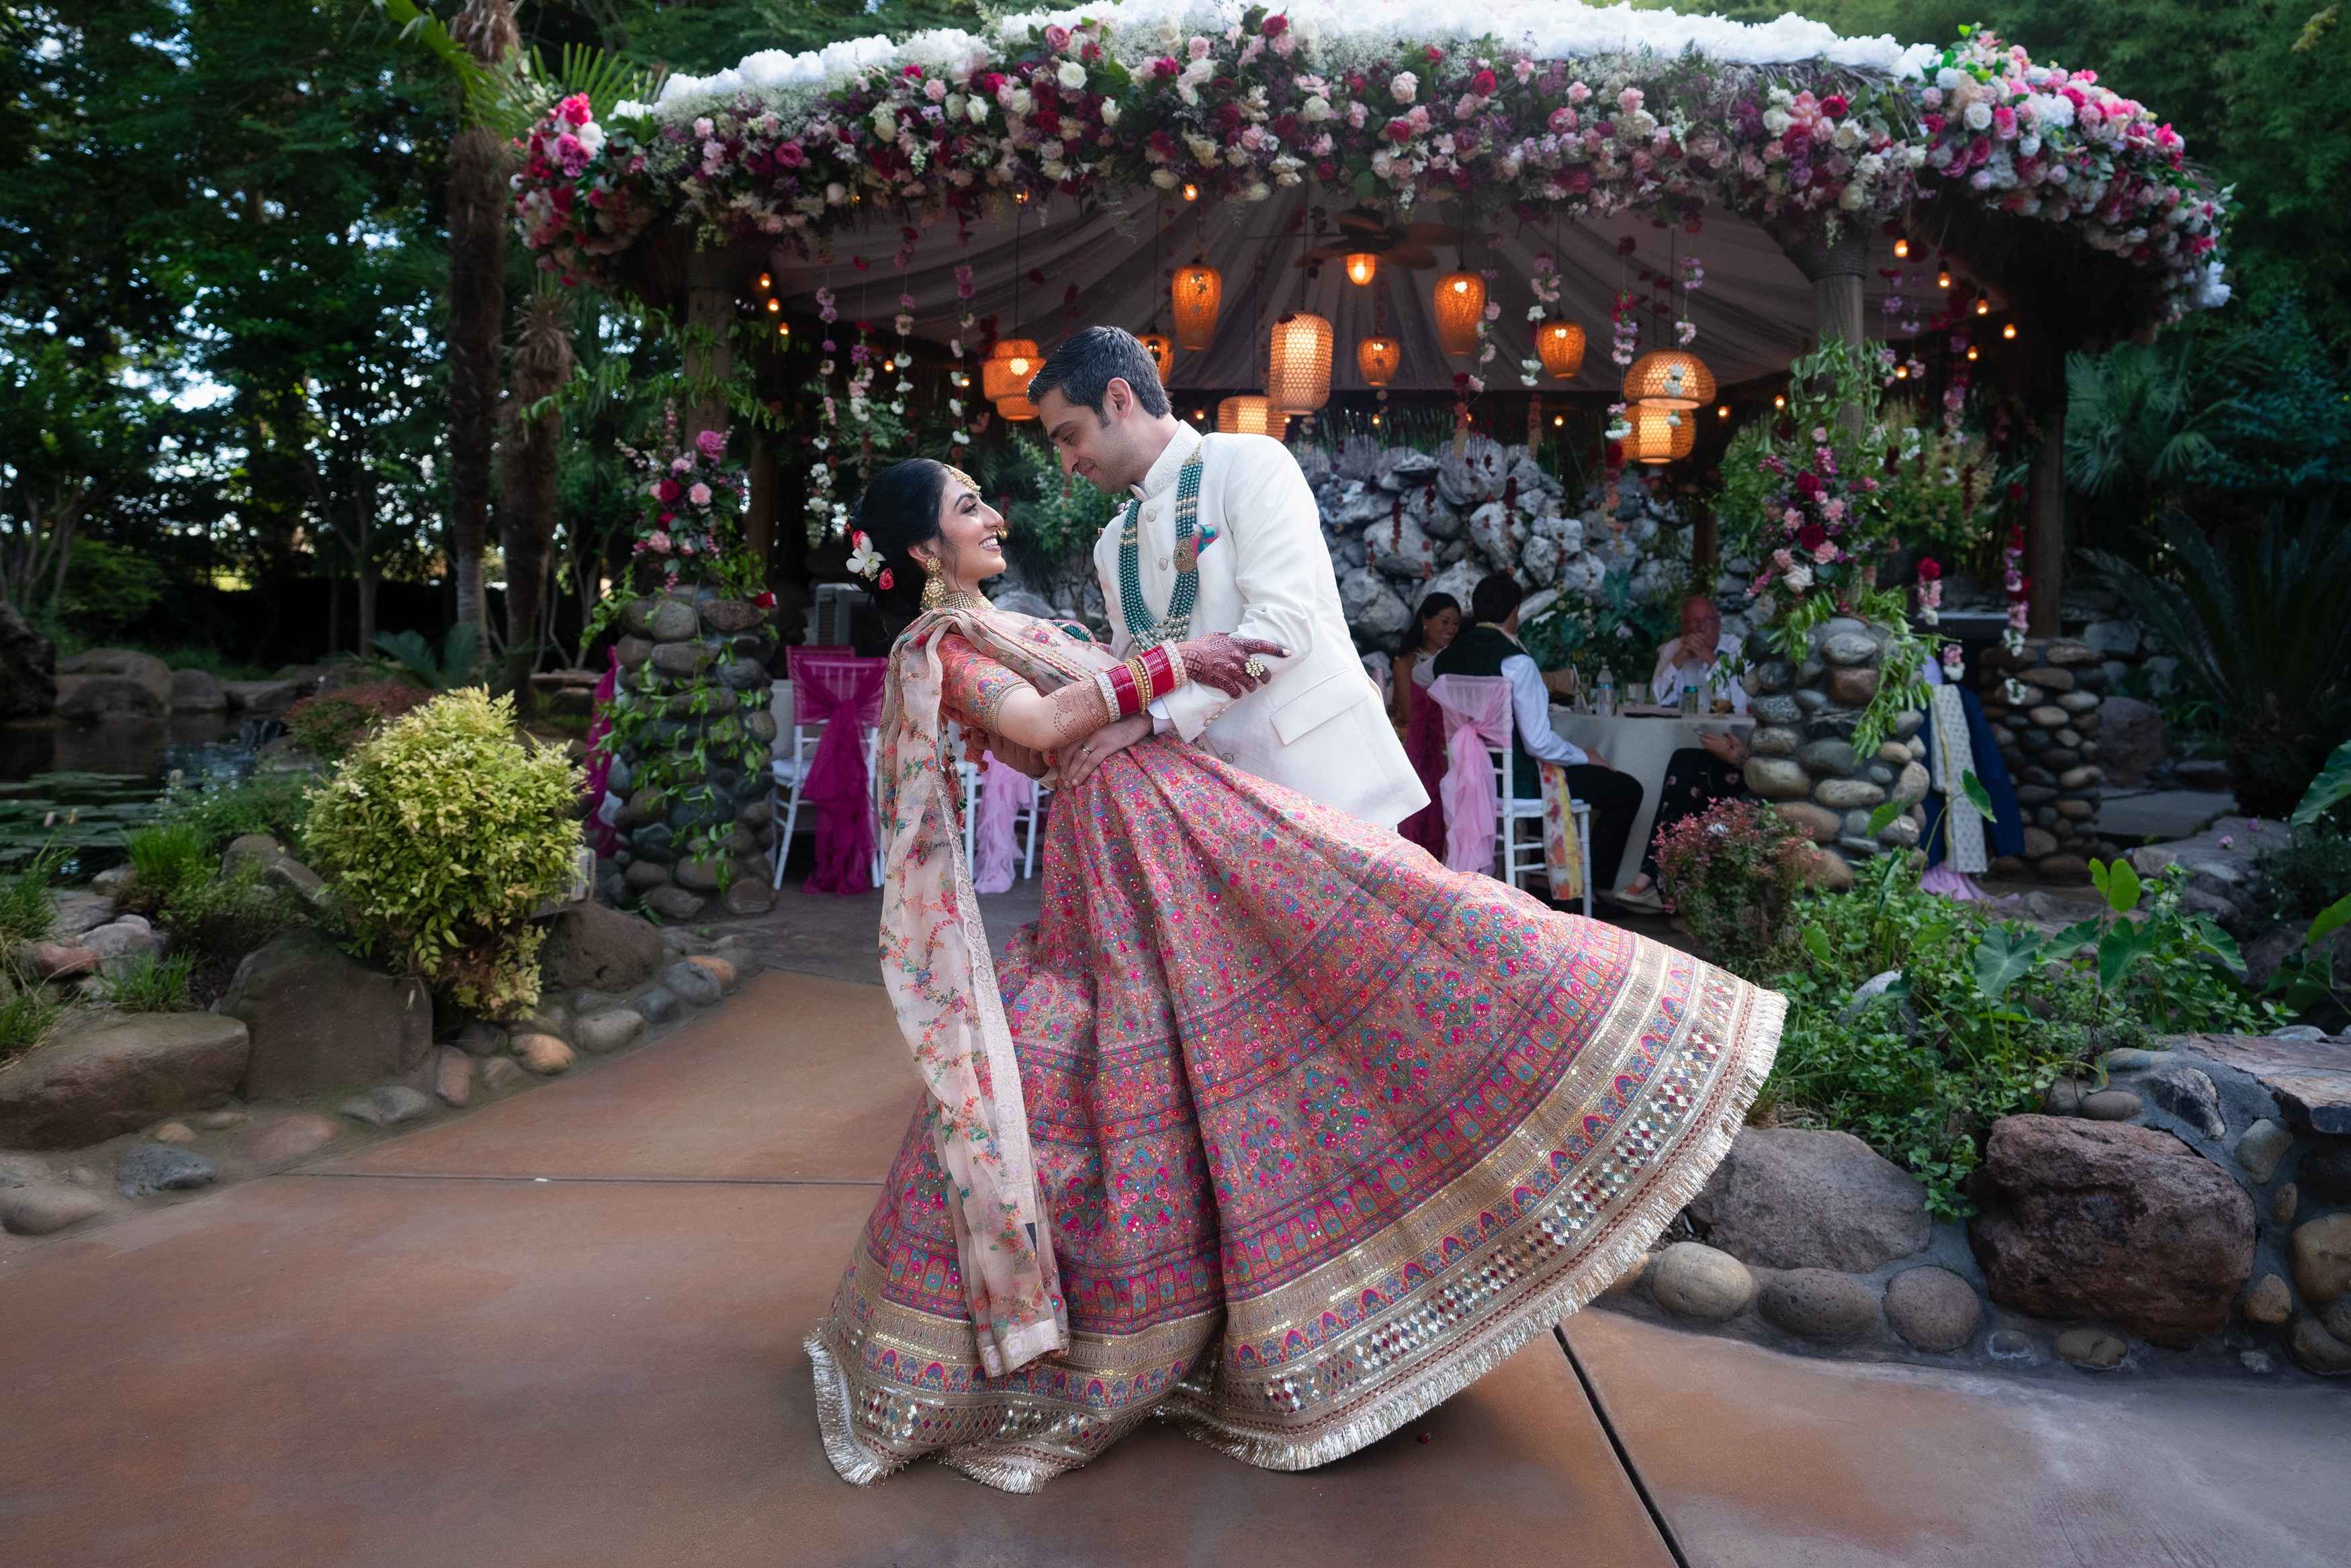 This California Bride Had A Magnificent Multicultural Wedding